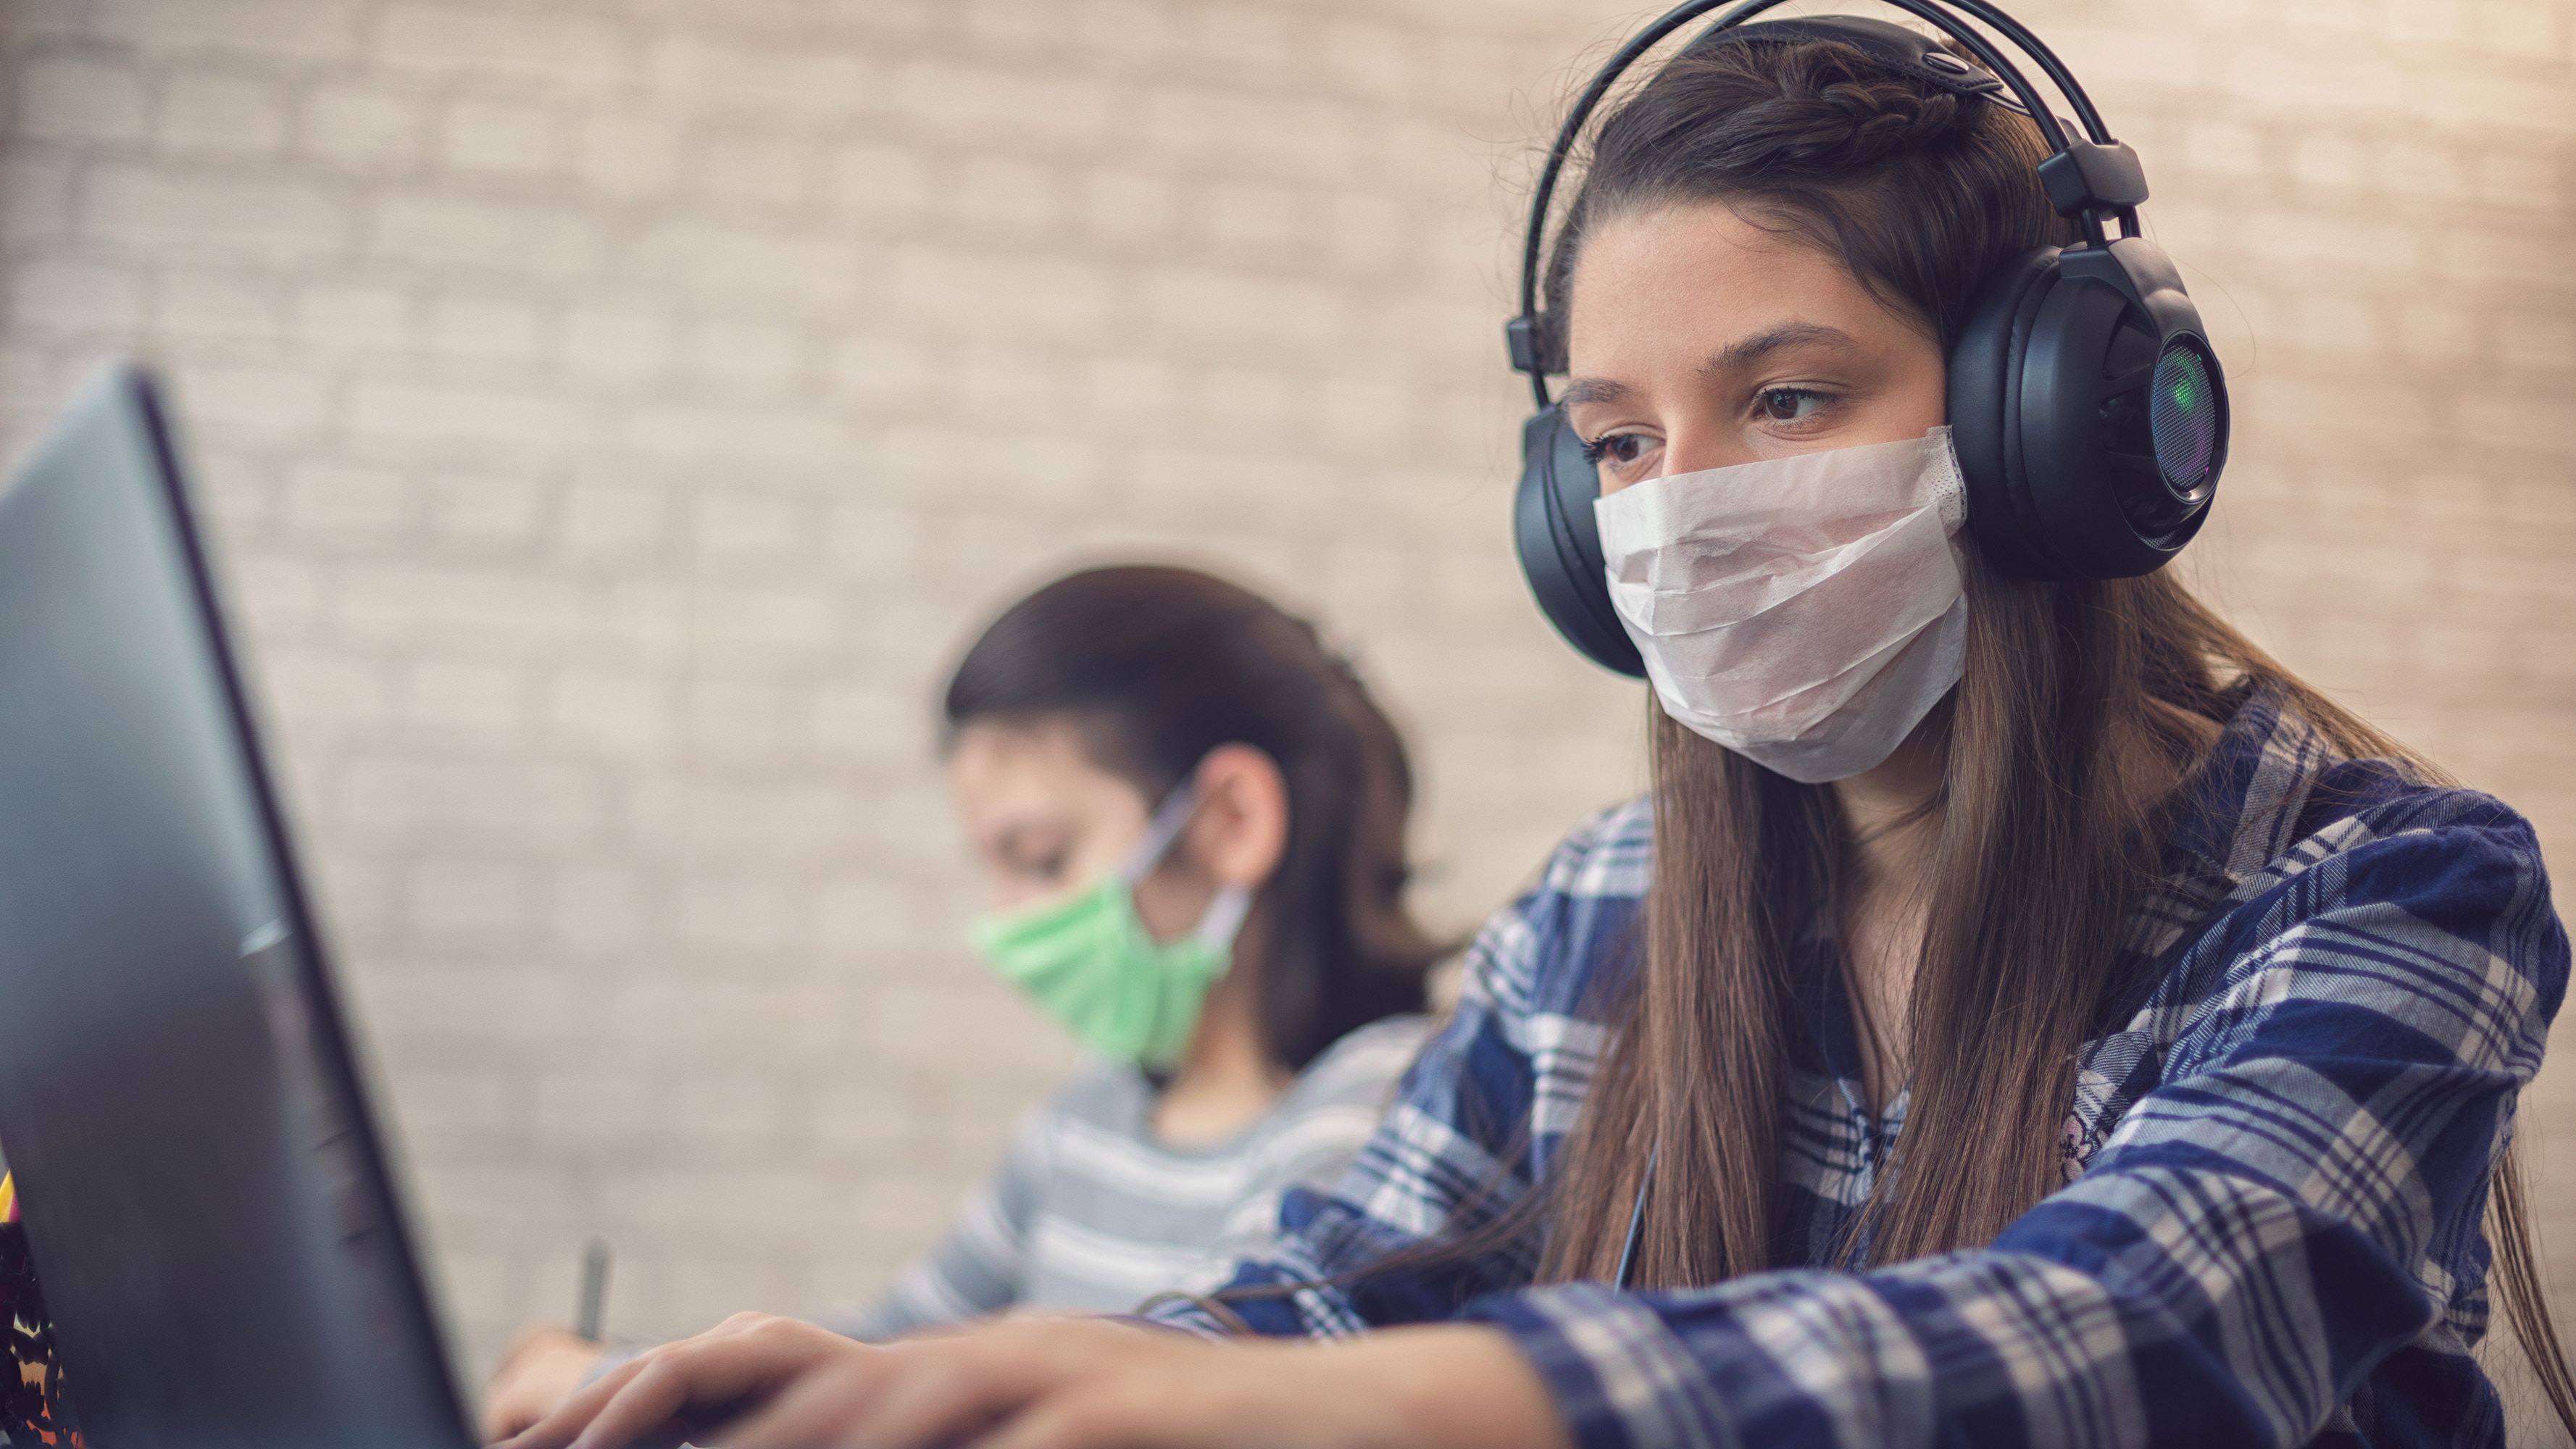 A young female student is seen wearing headphones and a face mask using a computer.